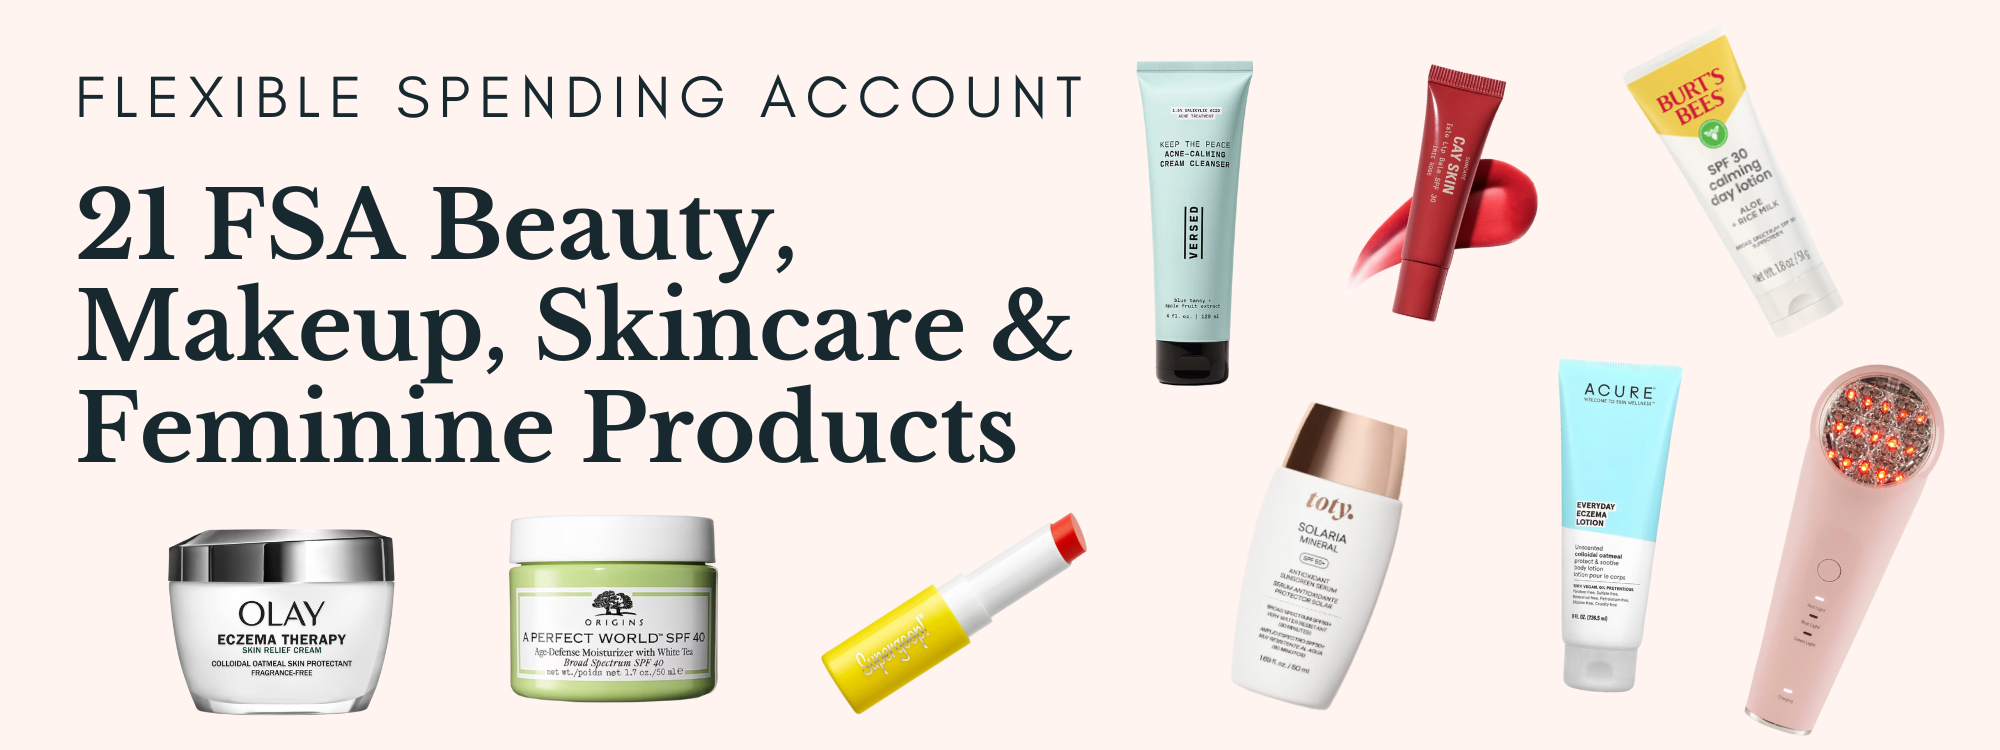 21 FSA Beauty, Makeup, Skincare and Feminine Products You Never Knew You  Could Buy — The Bossy Sauce - Career Podcast & Blog